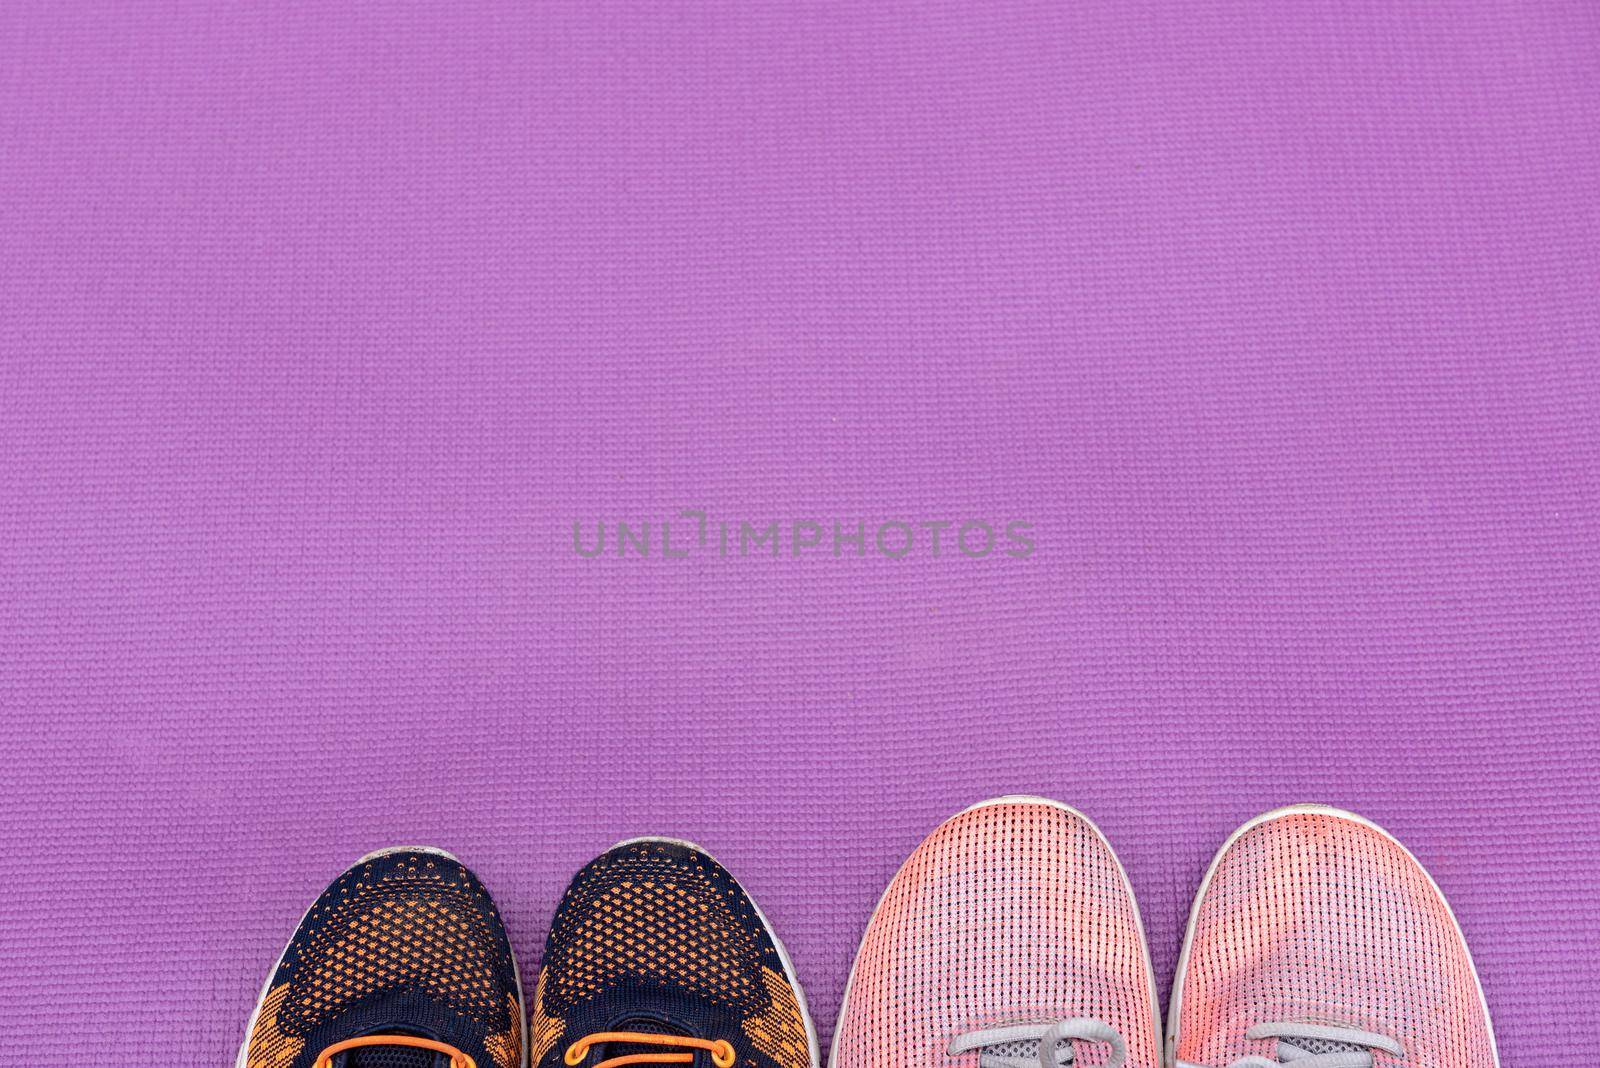 Sneakers and a purple fitness mat. Sport concept, top view. Sport concept